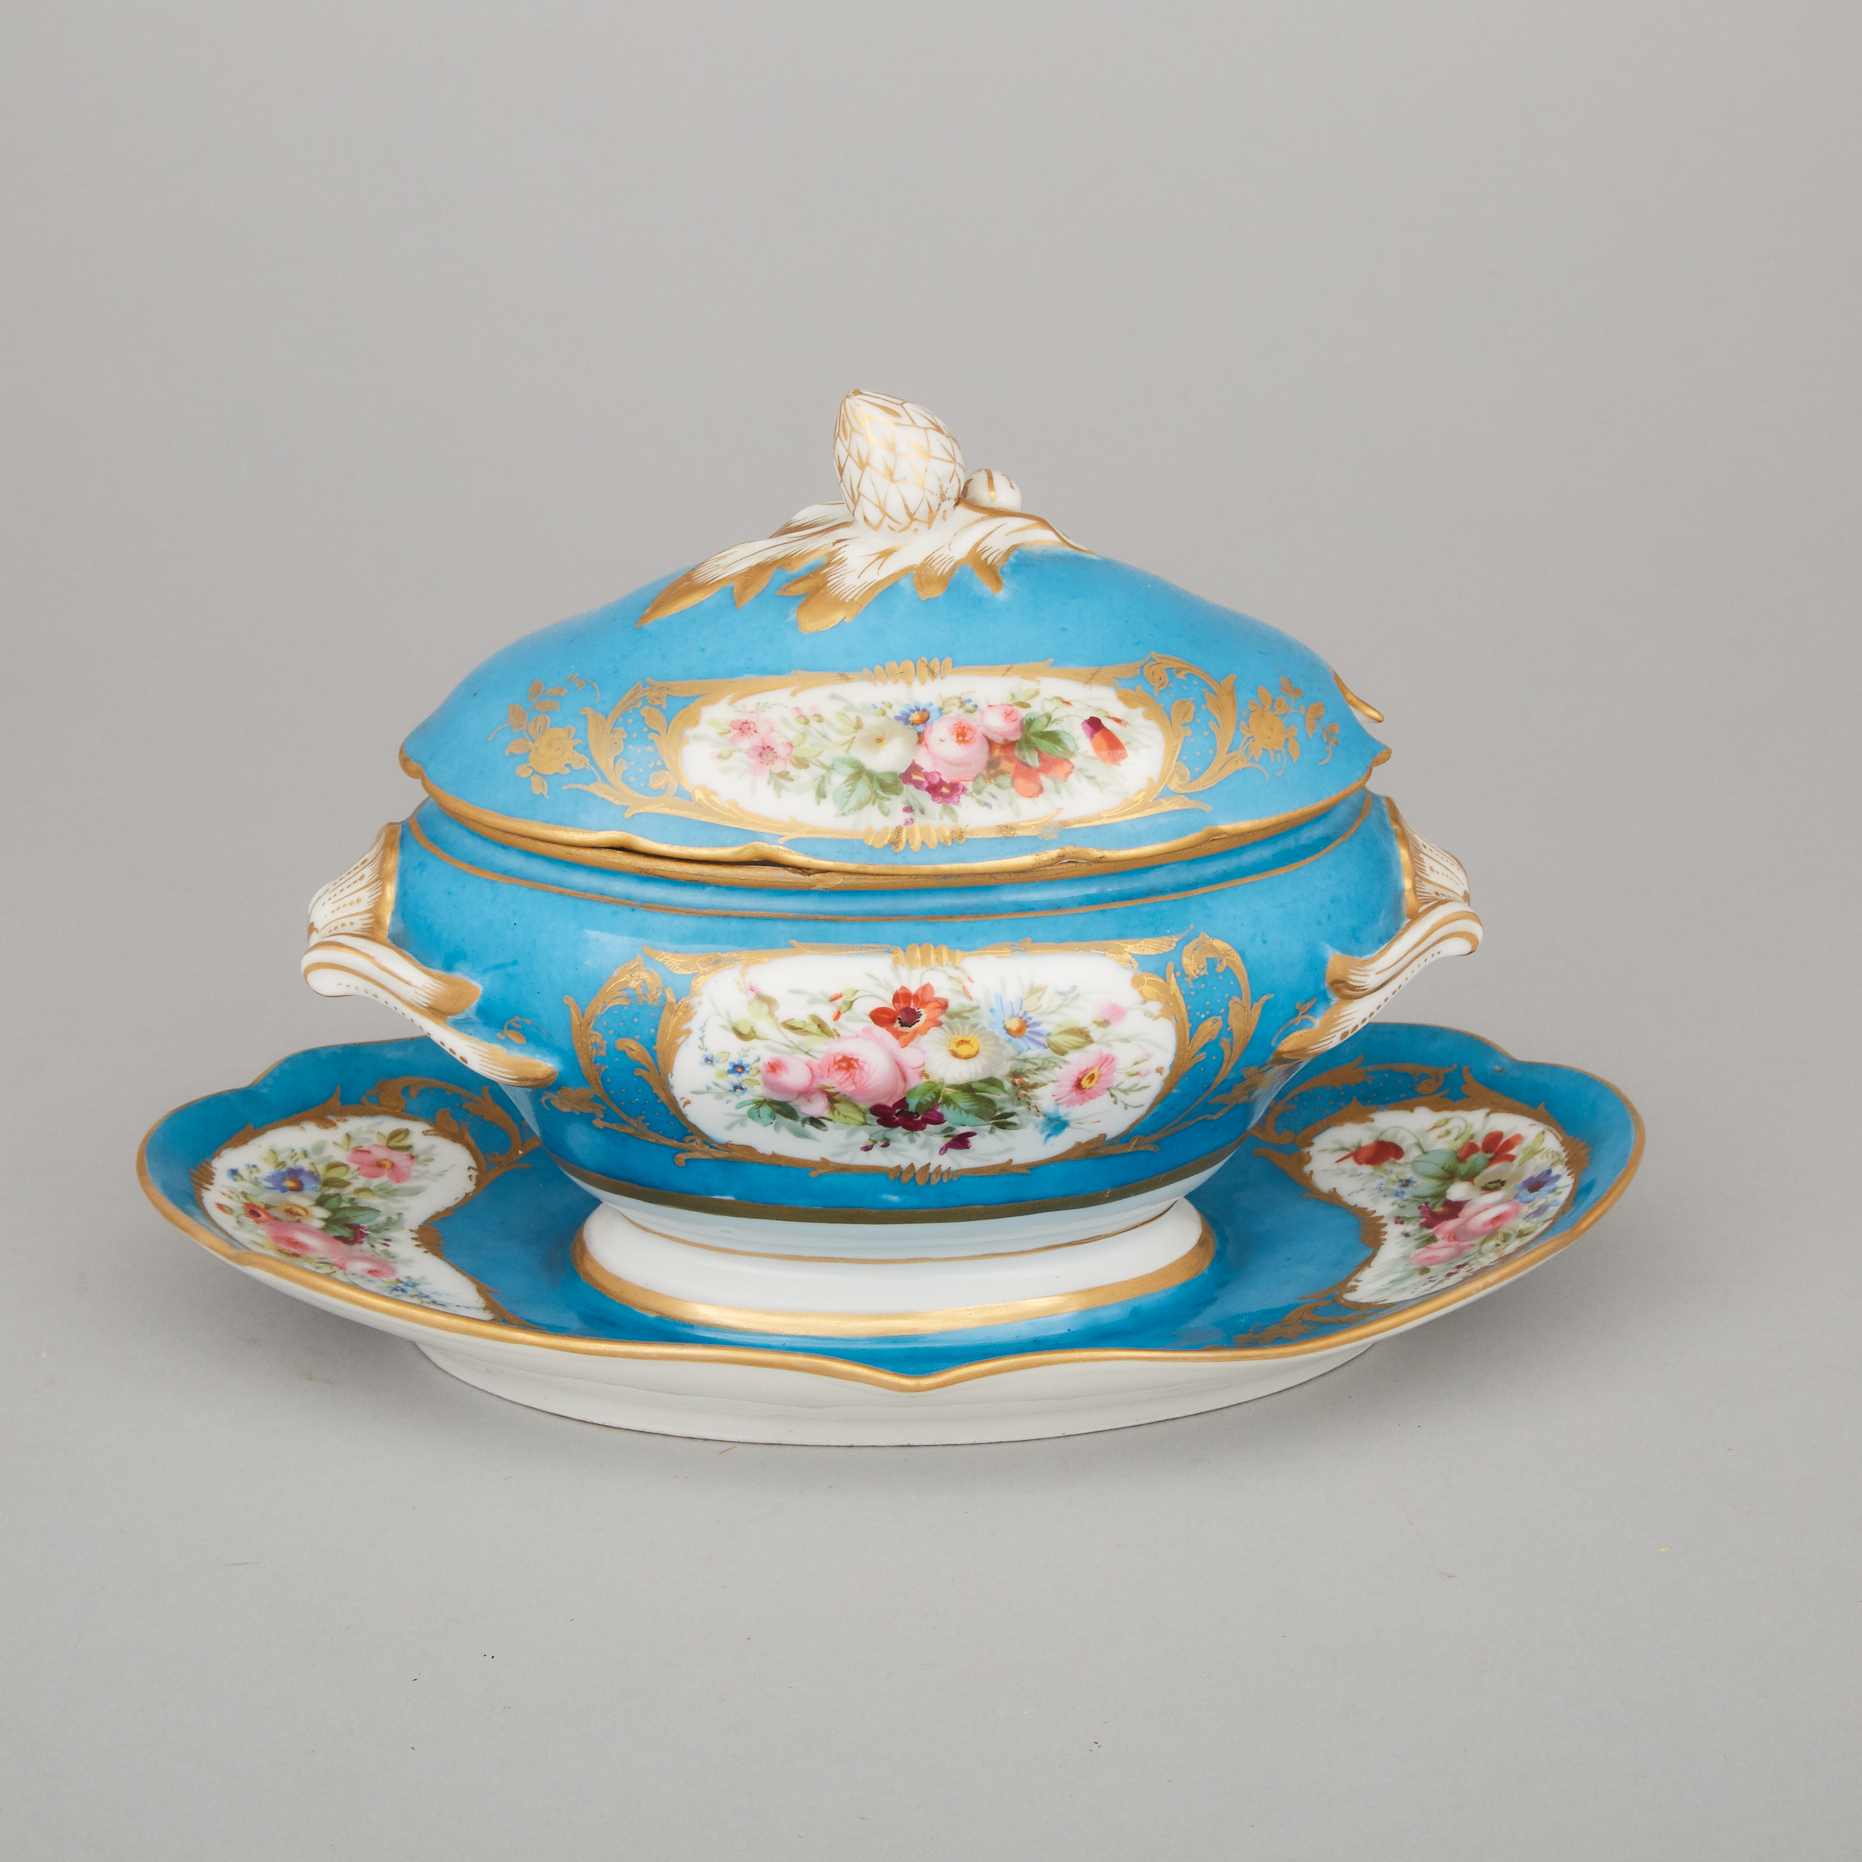 'Sèvres' Bleu Céleste Ground Covered Sauce Tureen on Stand, 19th century